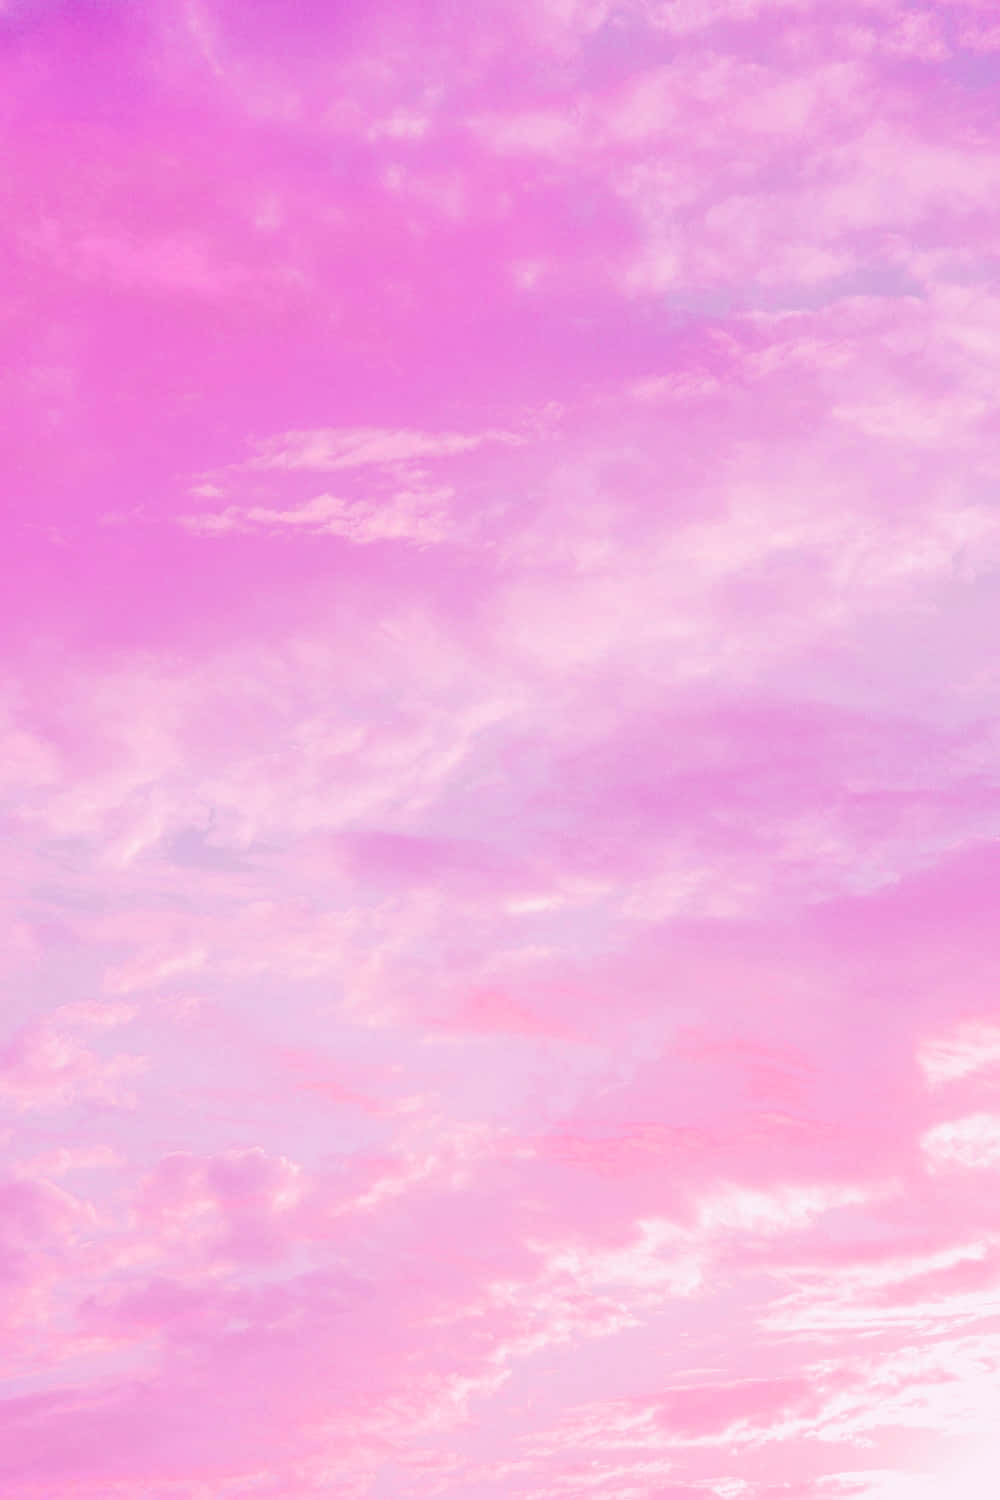 A Pink Sky With Clouds In The Background Background